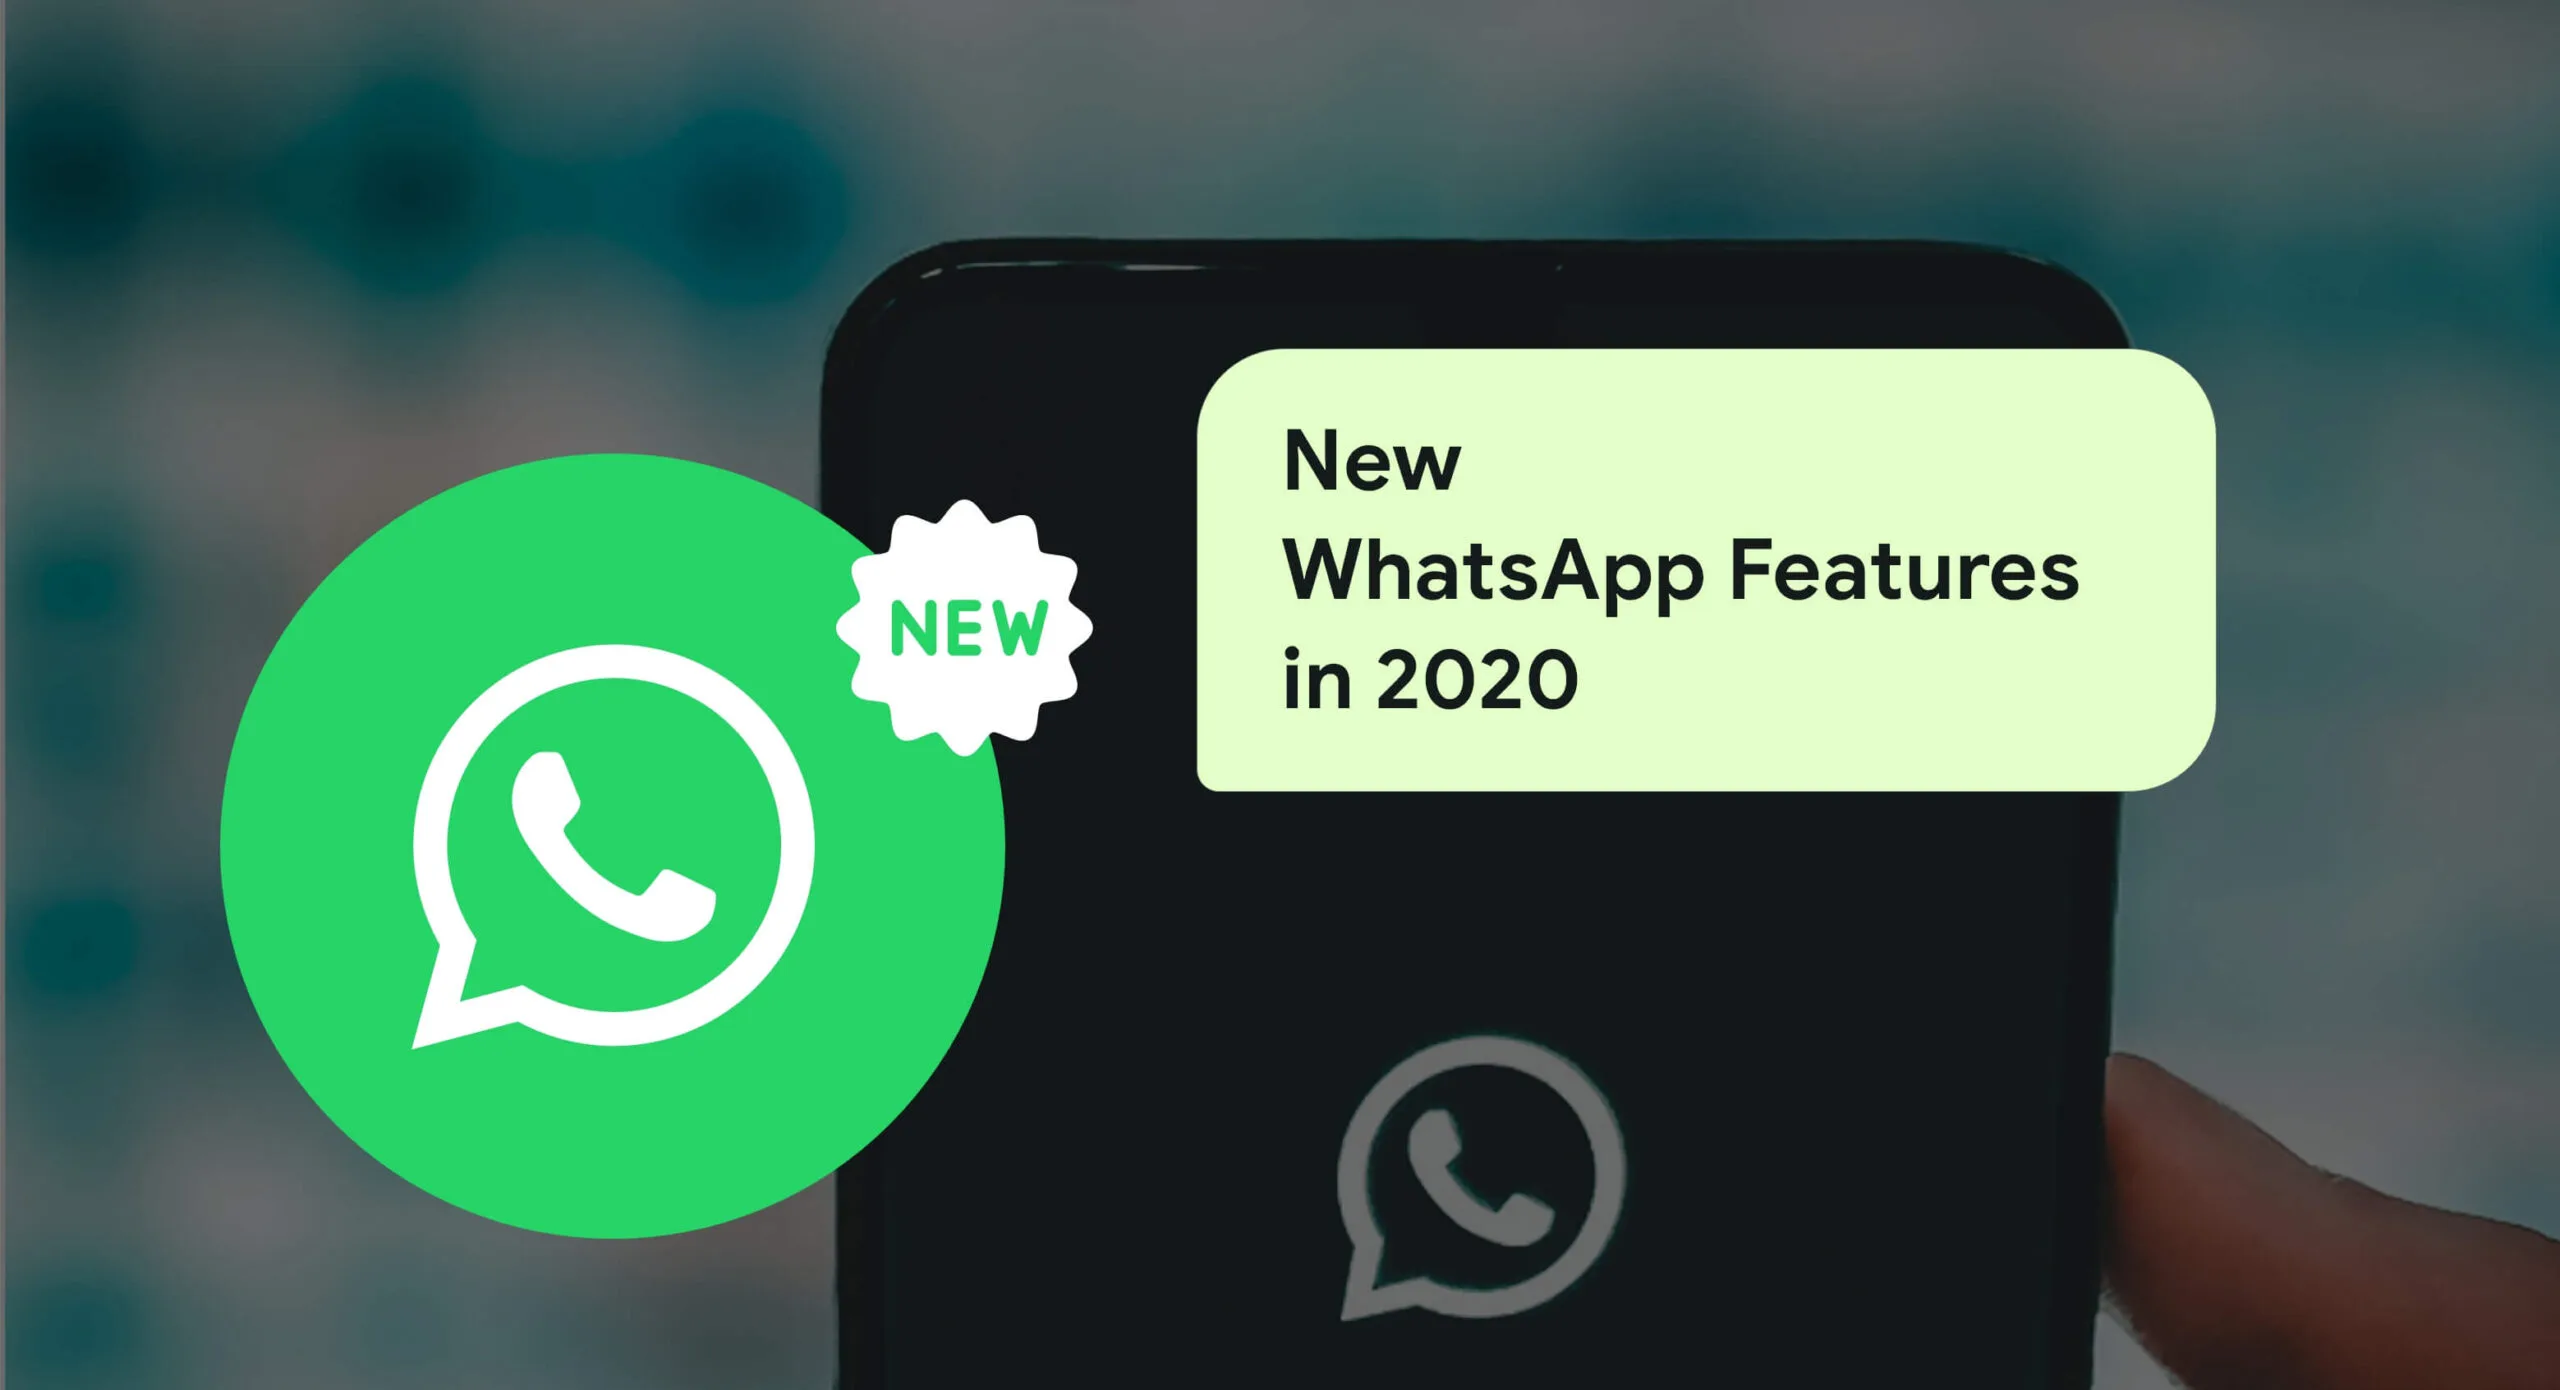 New-WhatsApp-Features-every-business-must-leverage-in-2020